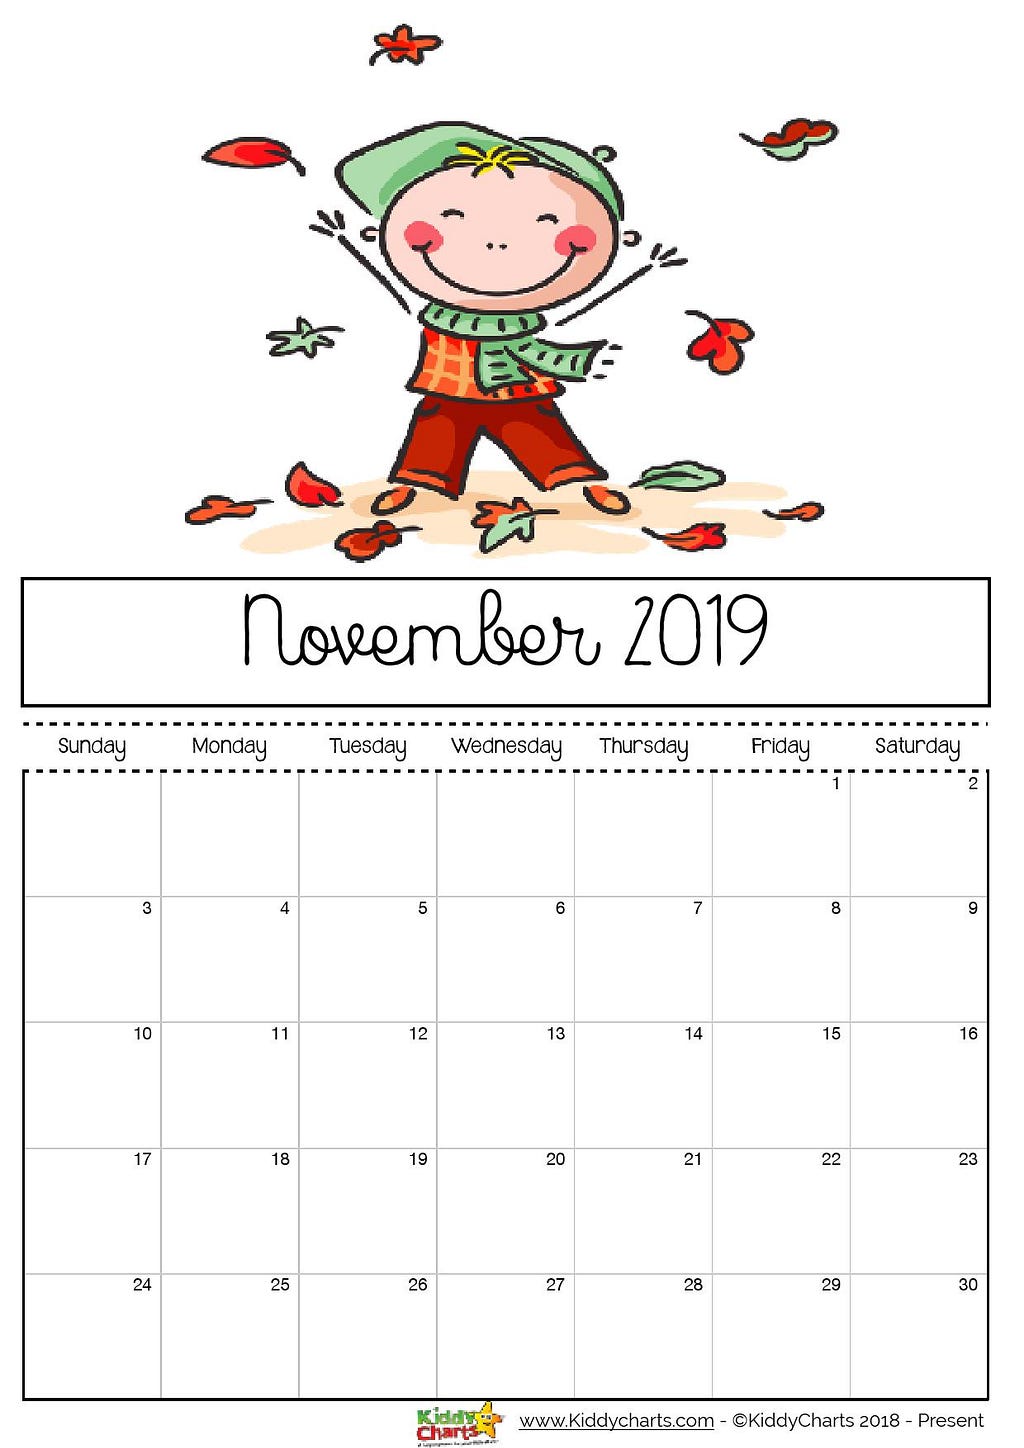 November 2019 printable calendar; boy kicking and playing with leaves - now that looks fun doesn't it?!? #printable #kidsprintables #2019calendar